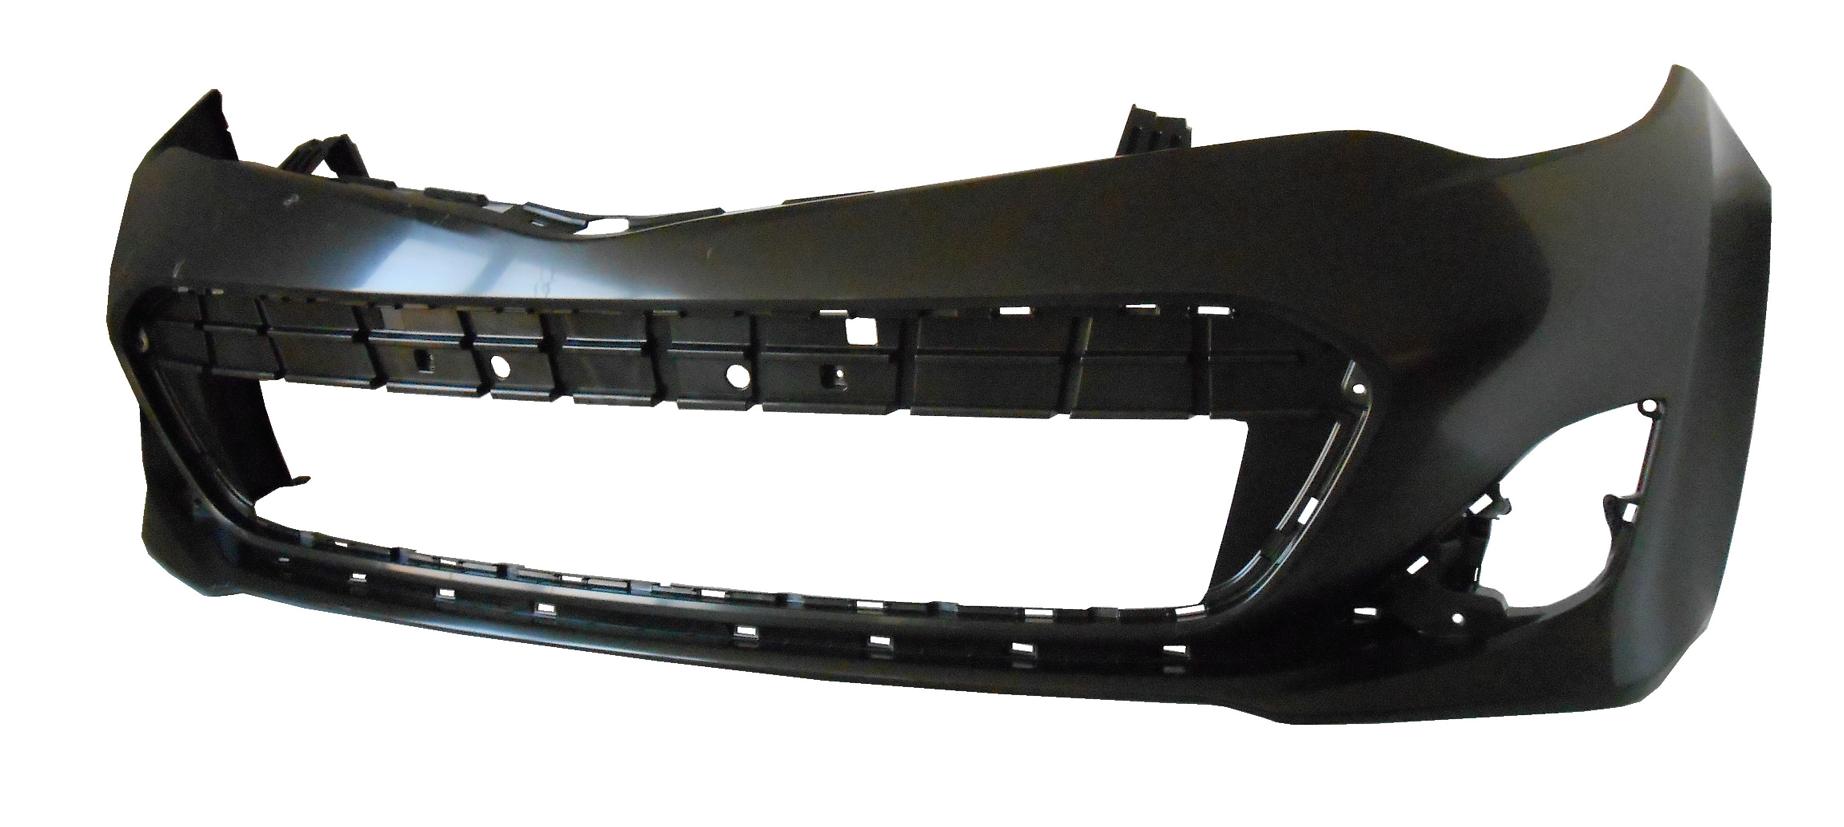 Aftermarket BUMPER COVERS for TOYOTA - AVALON, AVALON,13-15,Front bumper cover